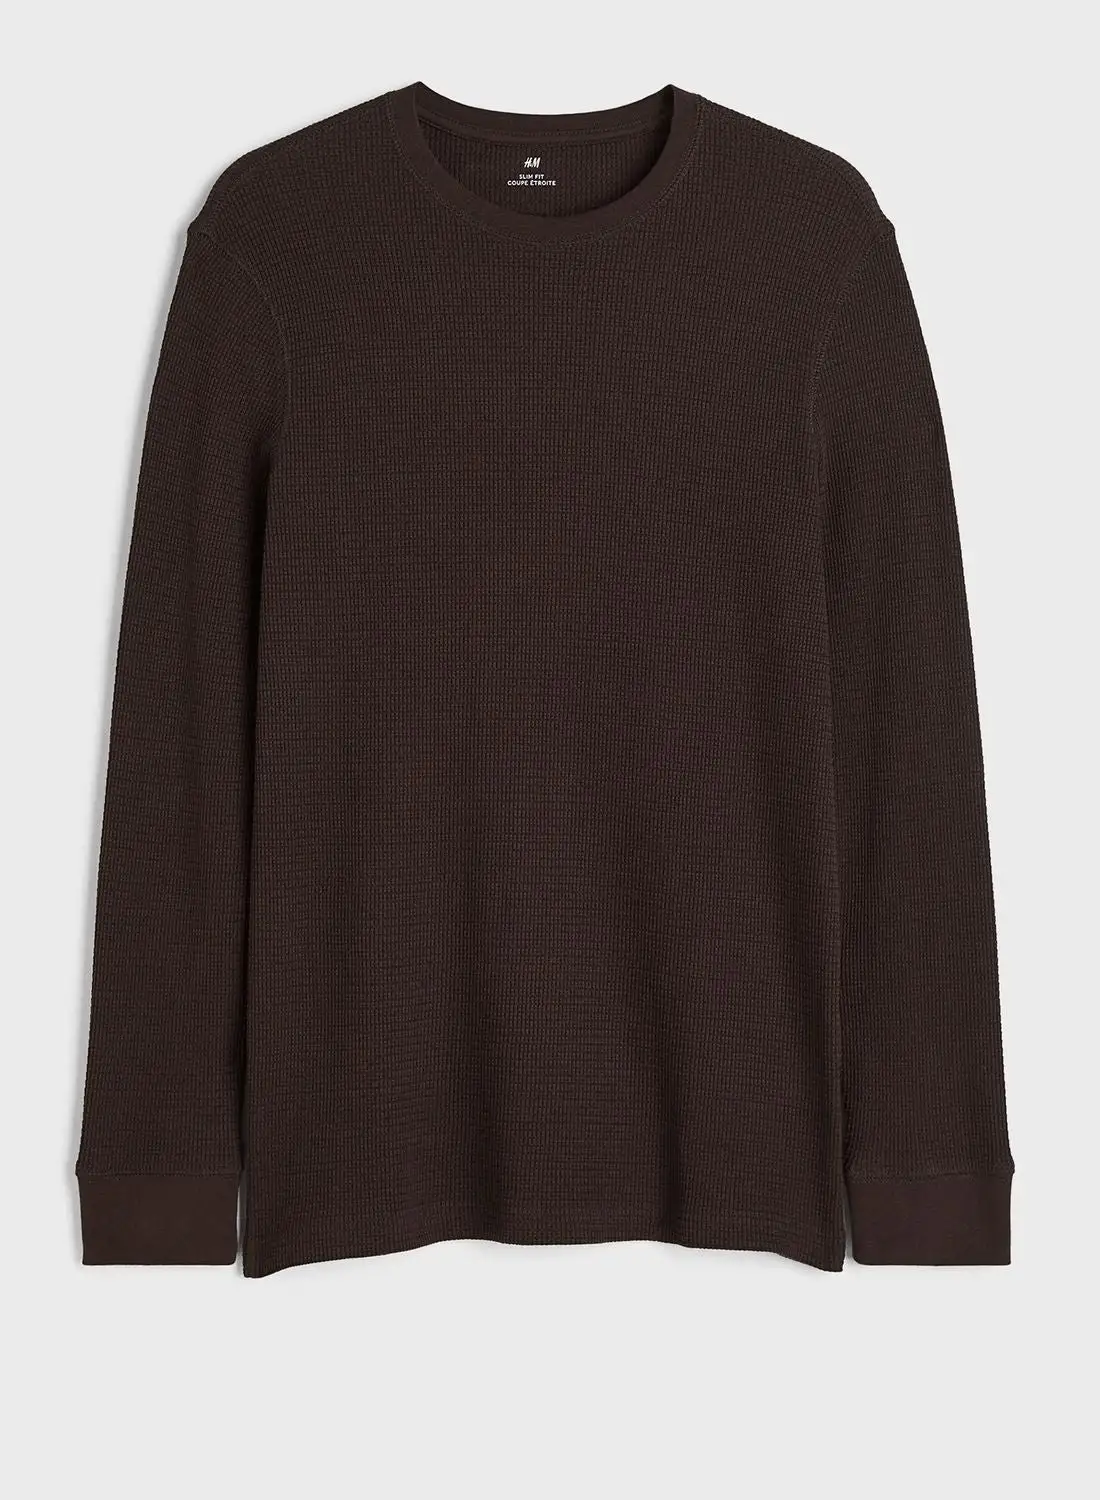 H&M Essential Slim Fit Knitted Sweater